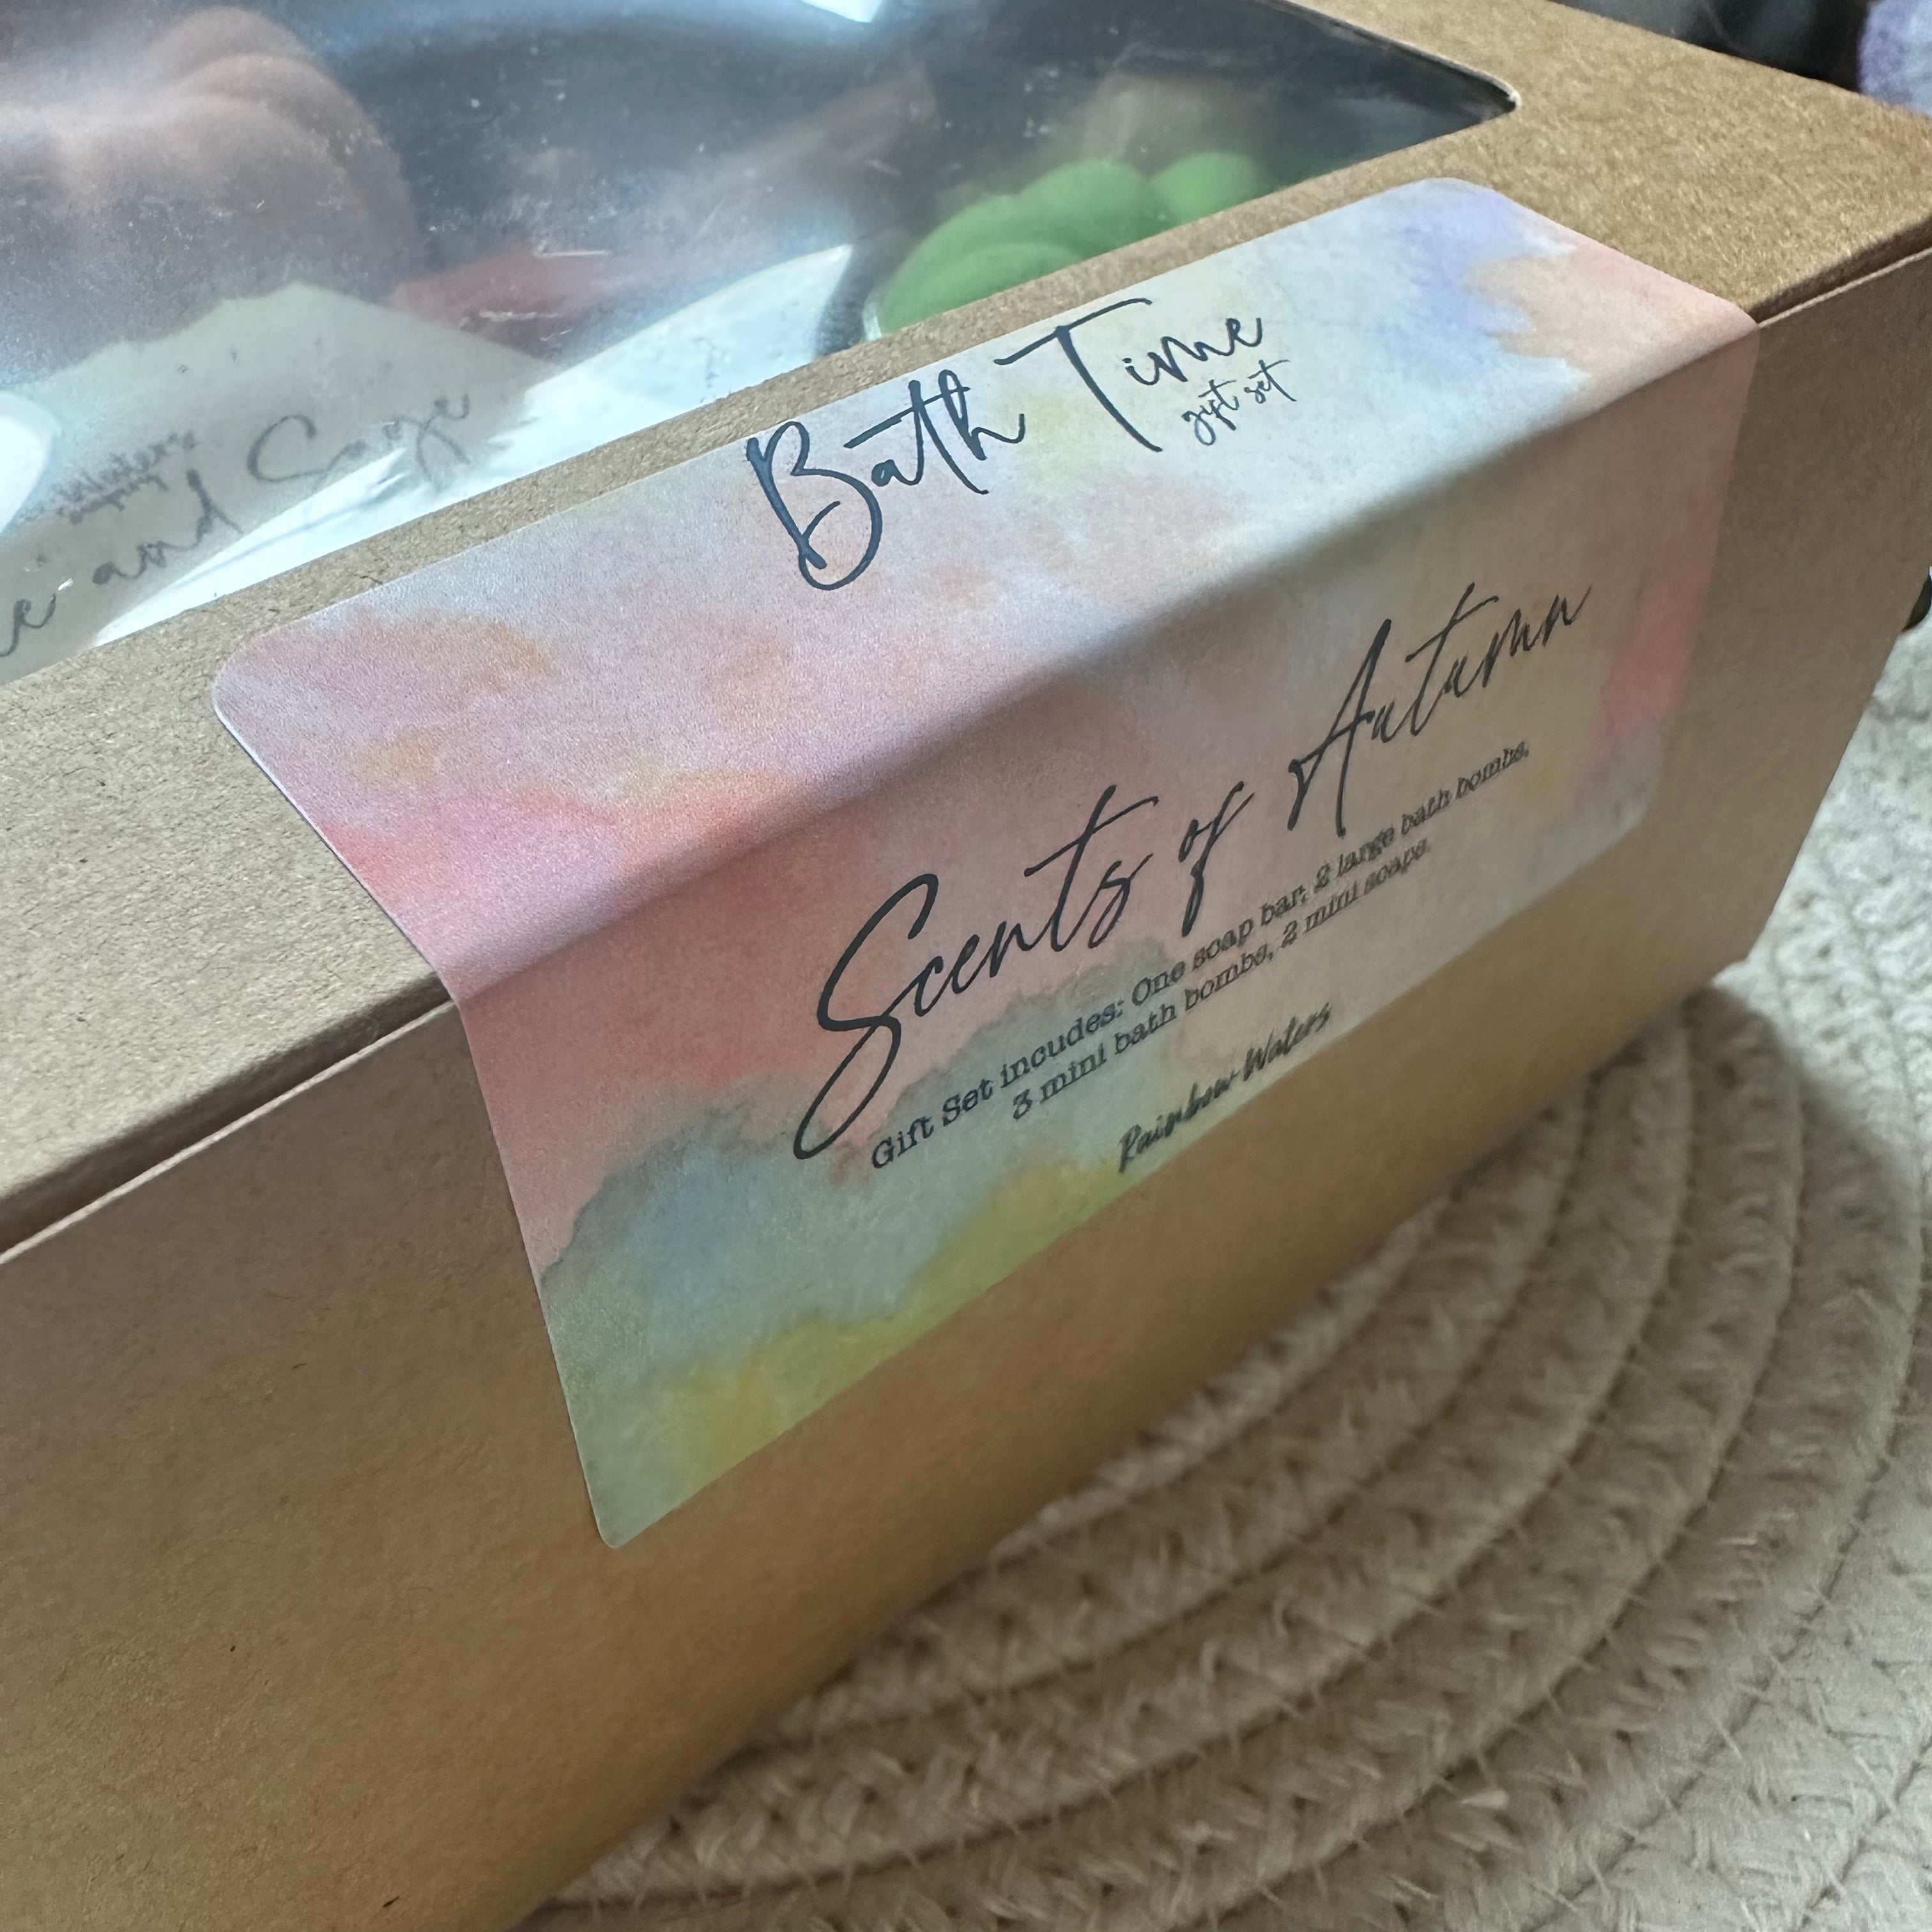 Bath Time Gift Set | Fall Collection | includes bath bombs & soaps